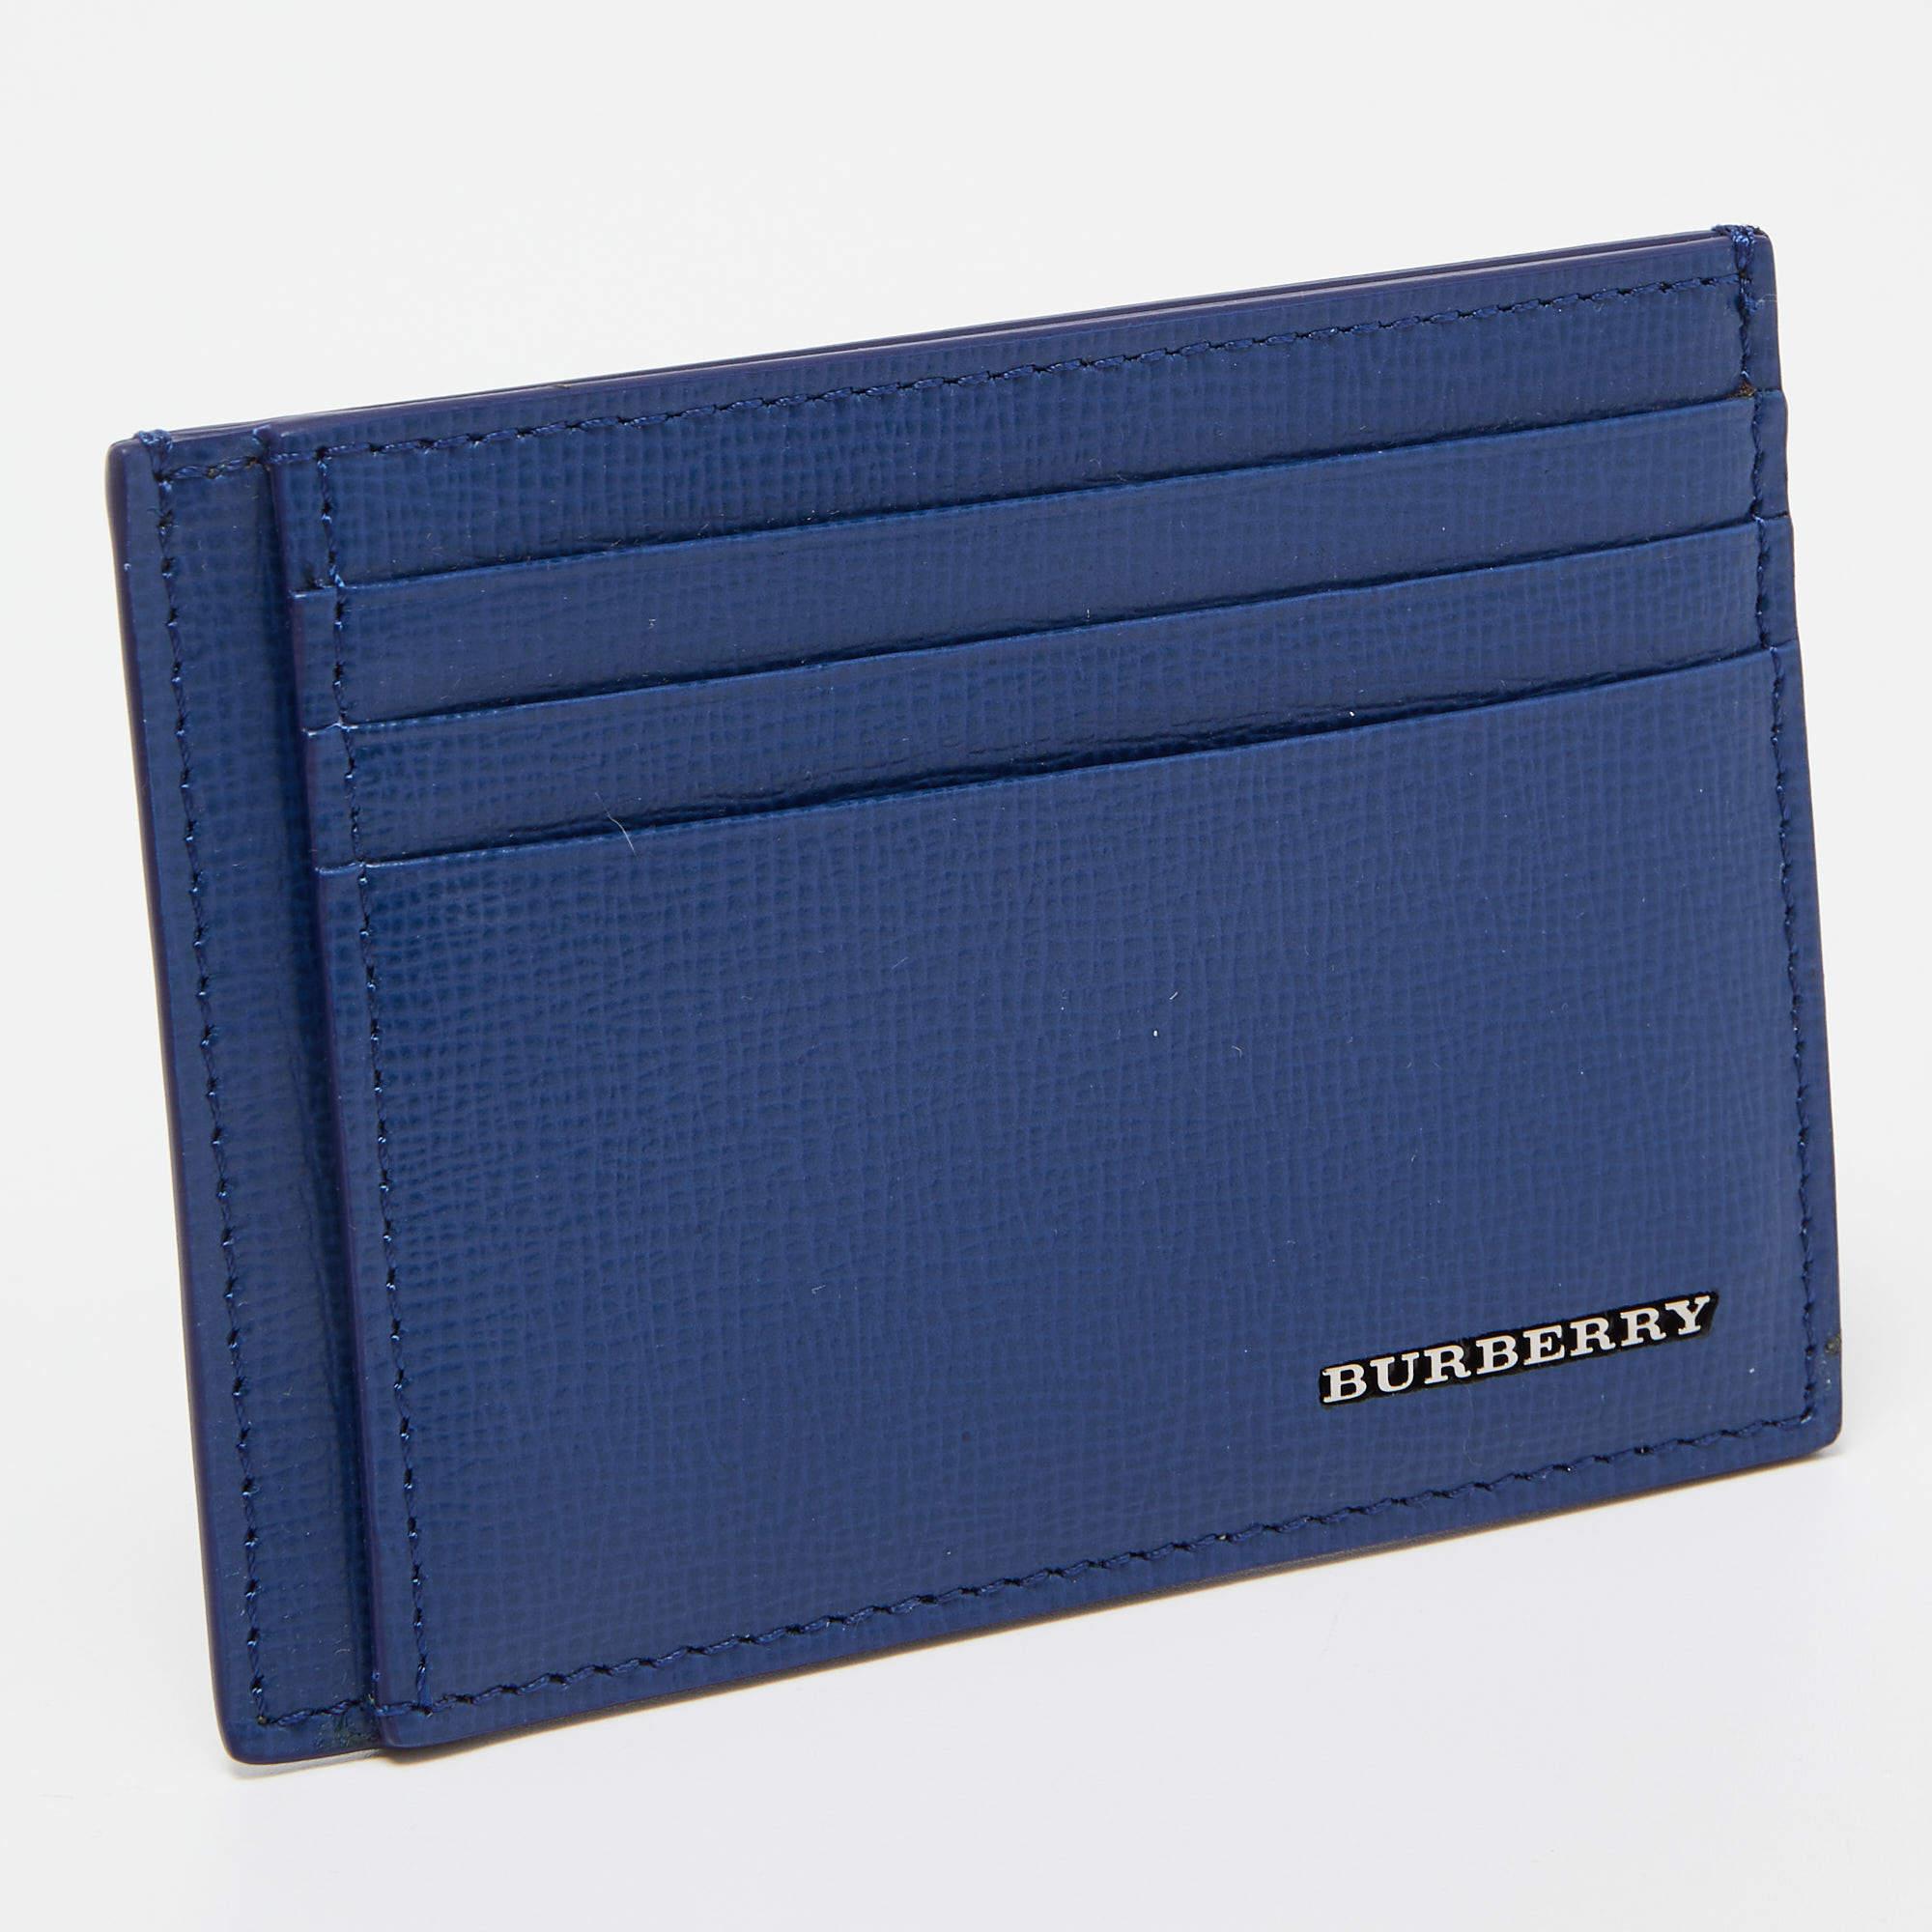 This stylish and functional Burberry cardholder is a must-have in your collection. It is equipped with multiple, well-lined slots to hold your cards.

